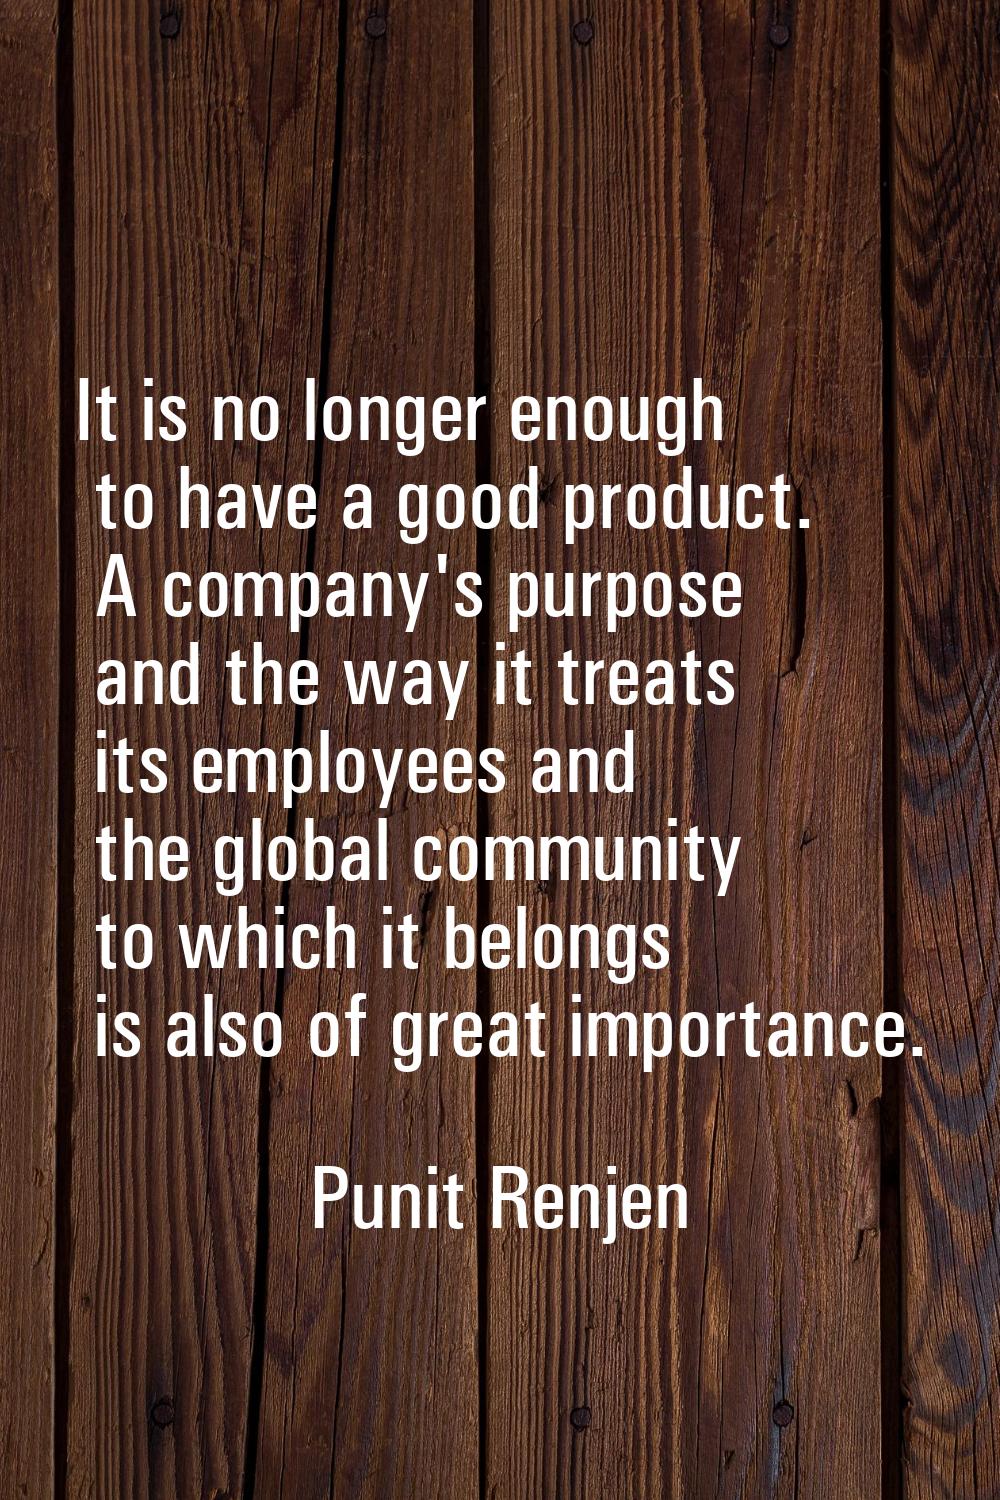 It is no longer enough to have a good product. A company's purpose and the way it treats its employ